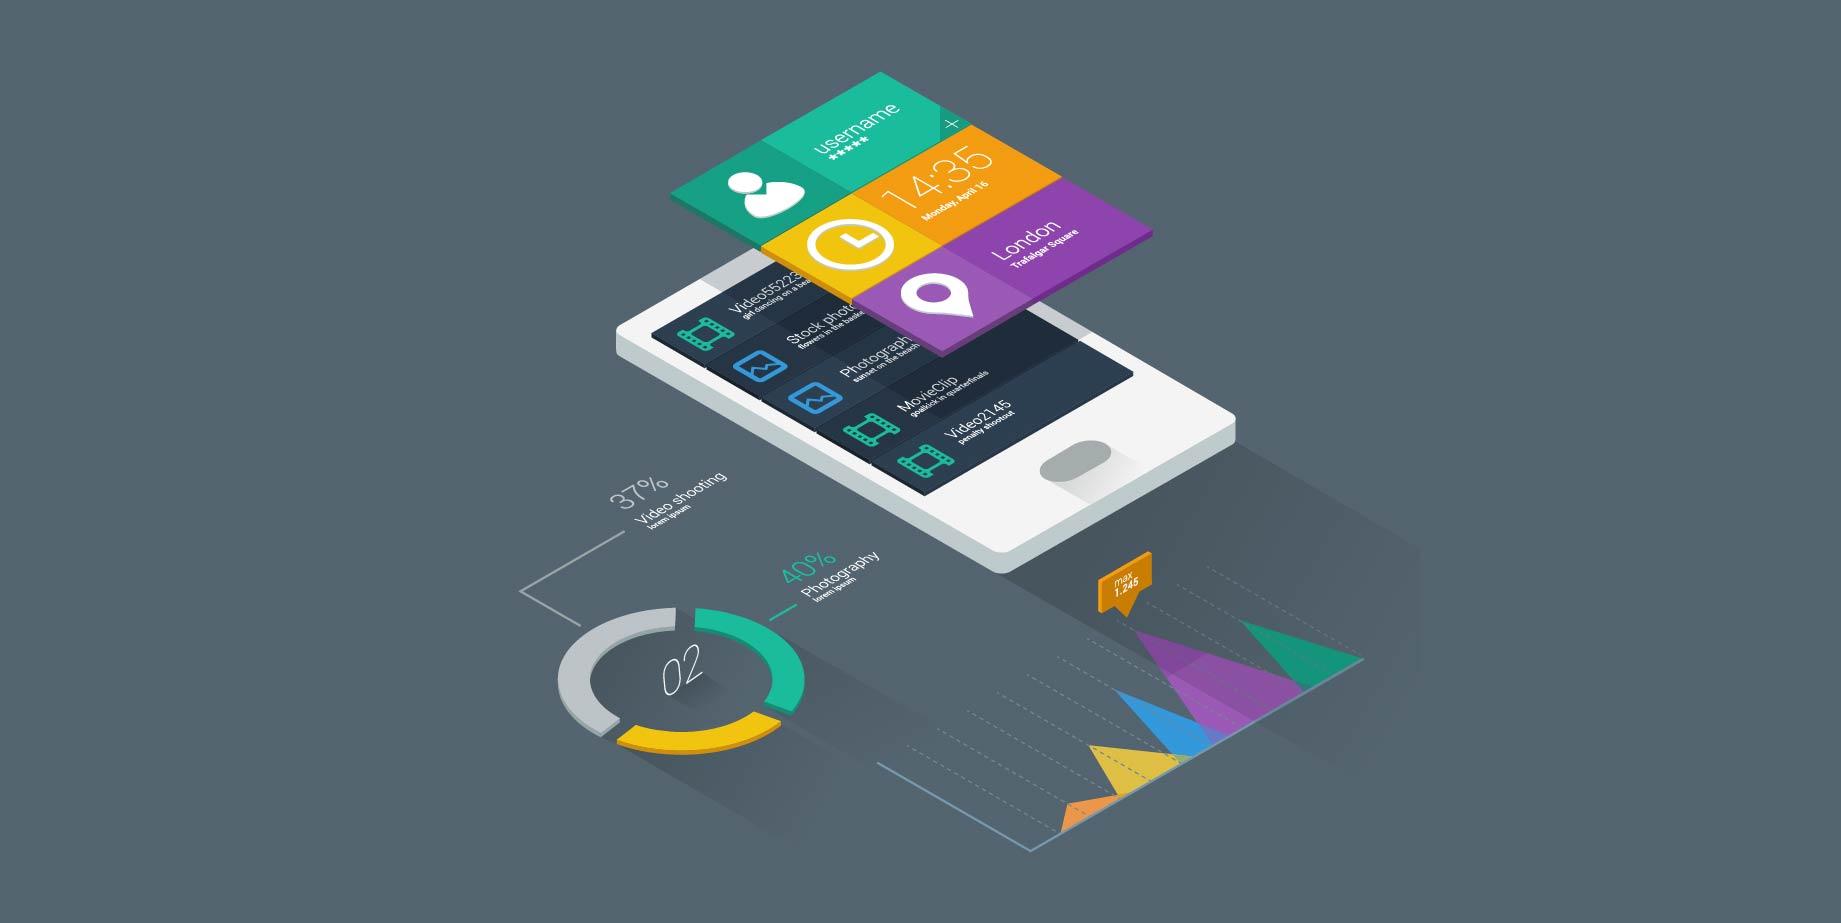 How to Improve UX/UI Design of a Mobile Application